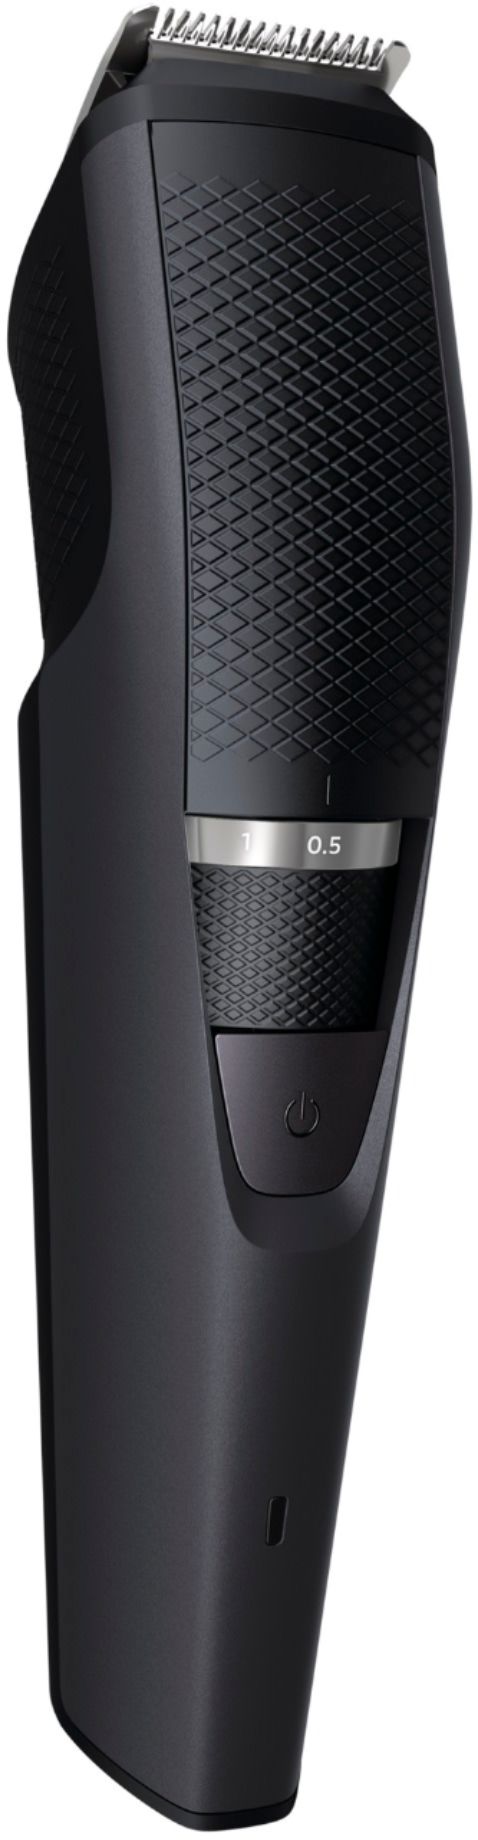 philips norelco beard trimmer 3000 review